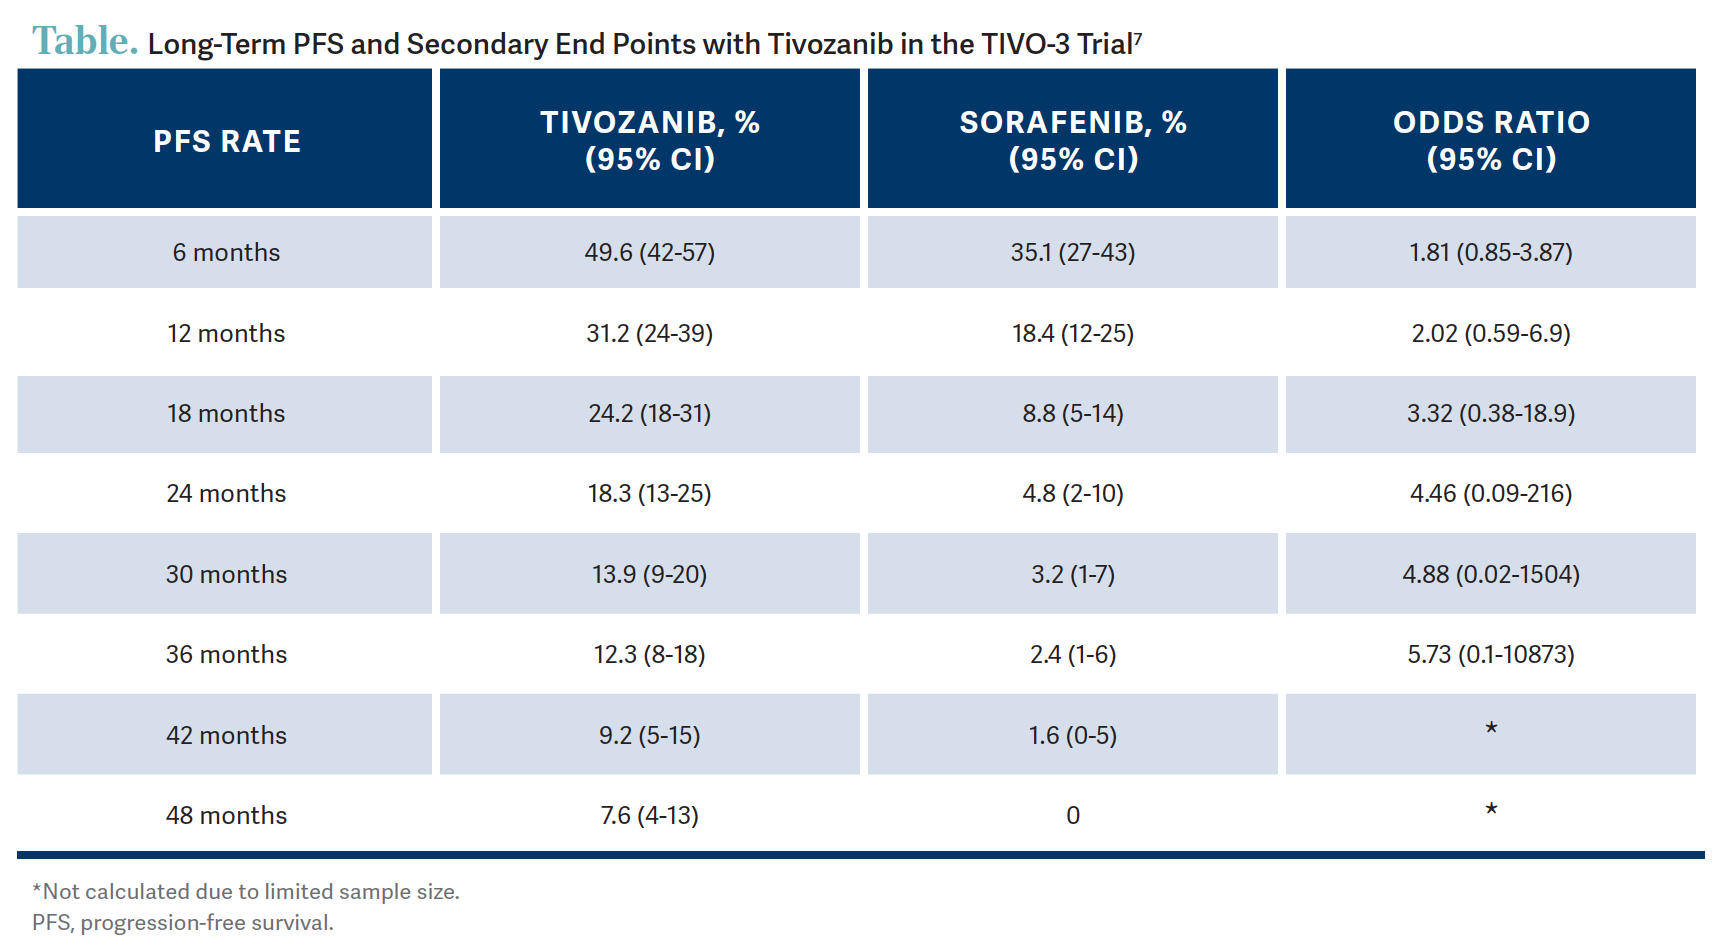 Table. Long-Term PFS and Secondary End Points with Tivozanib in the TIVO-3 Trial